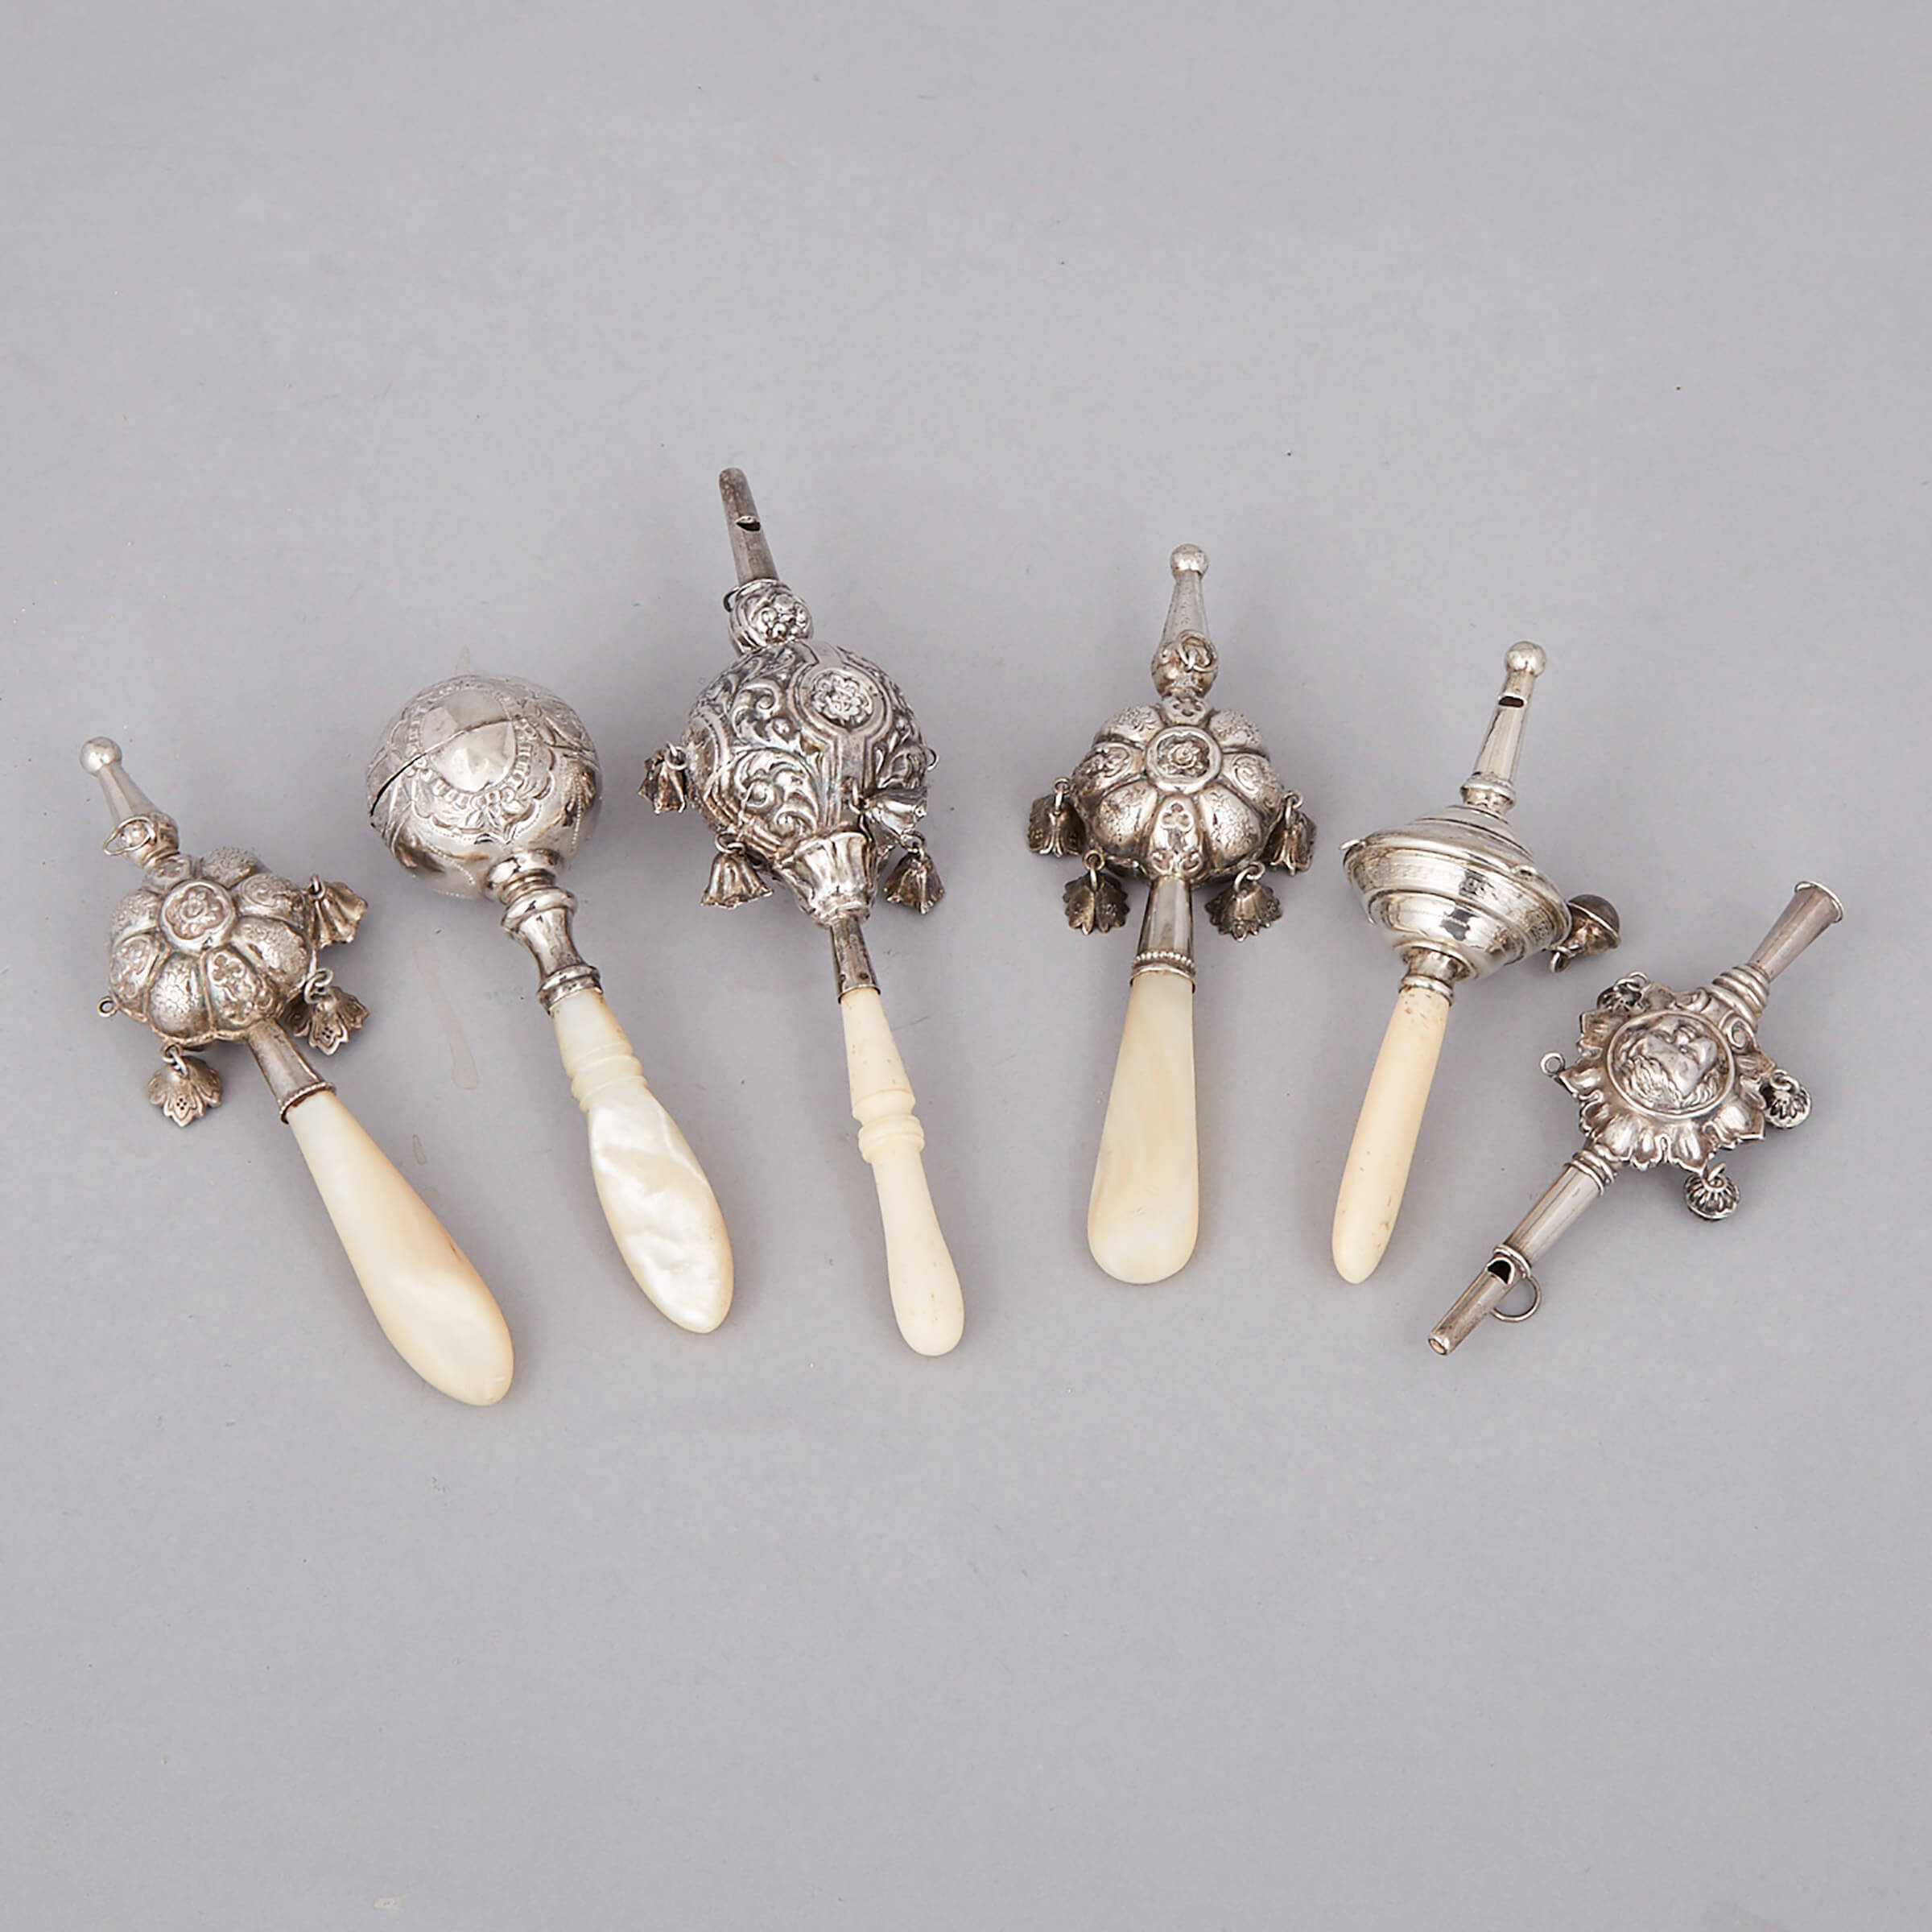 Six Continental Silver Child’s Rattles and Whistles, late 19th/20th century